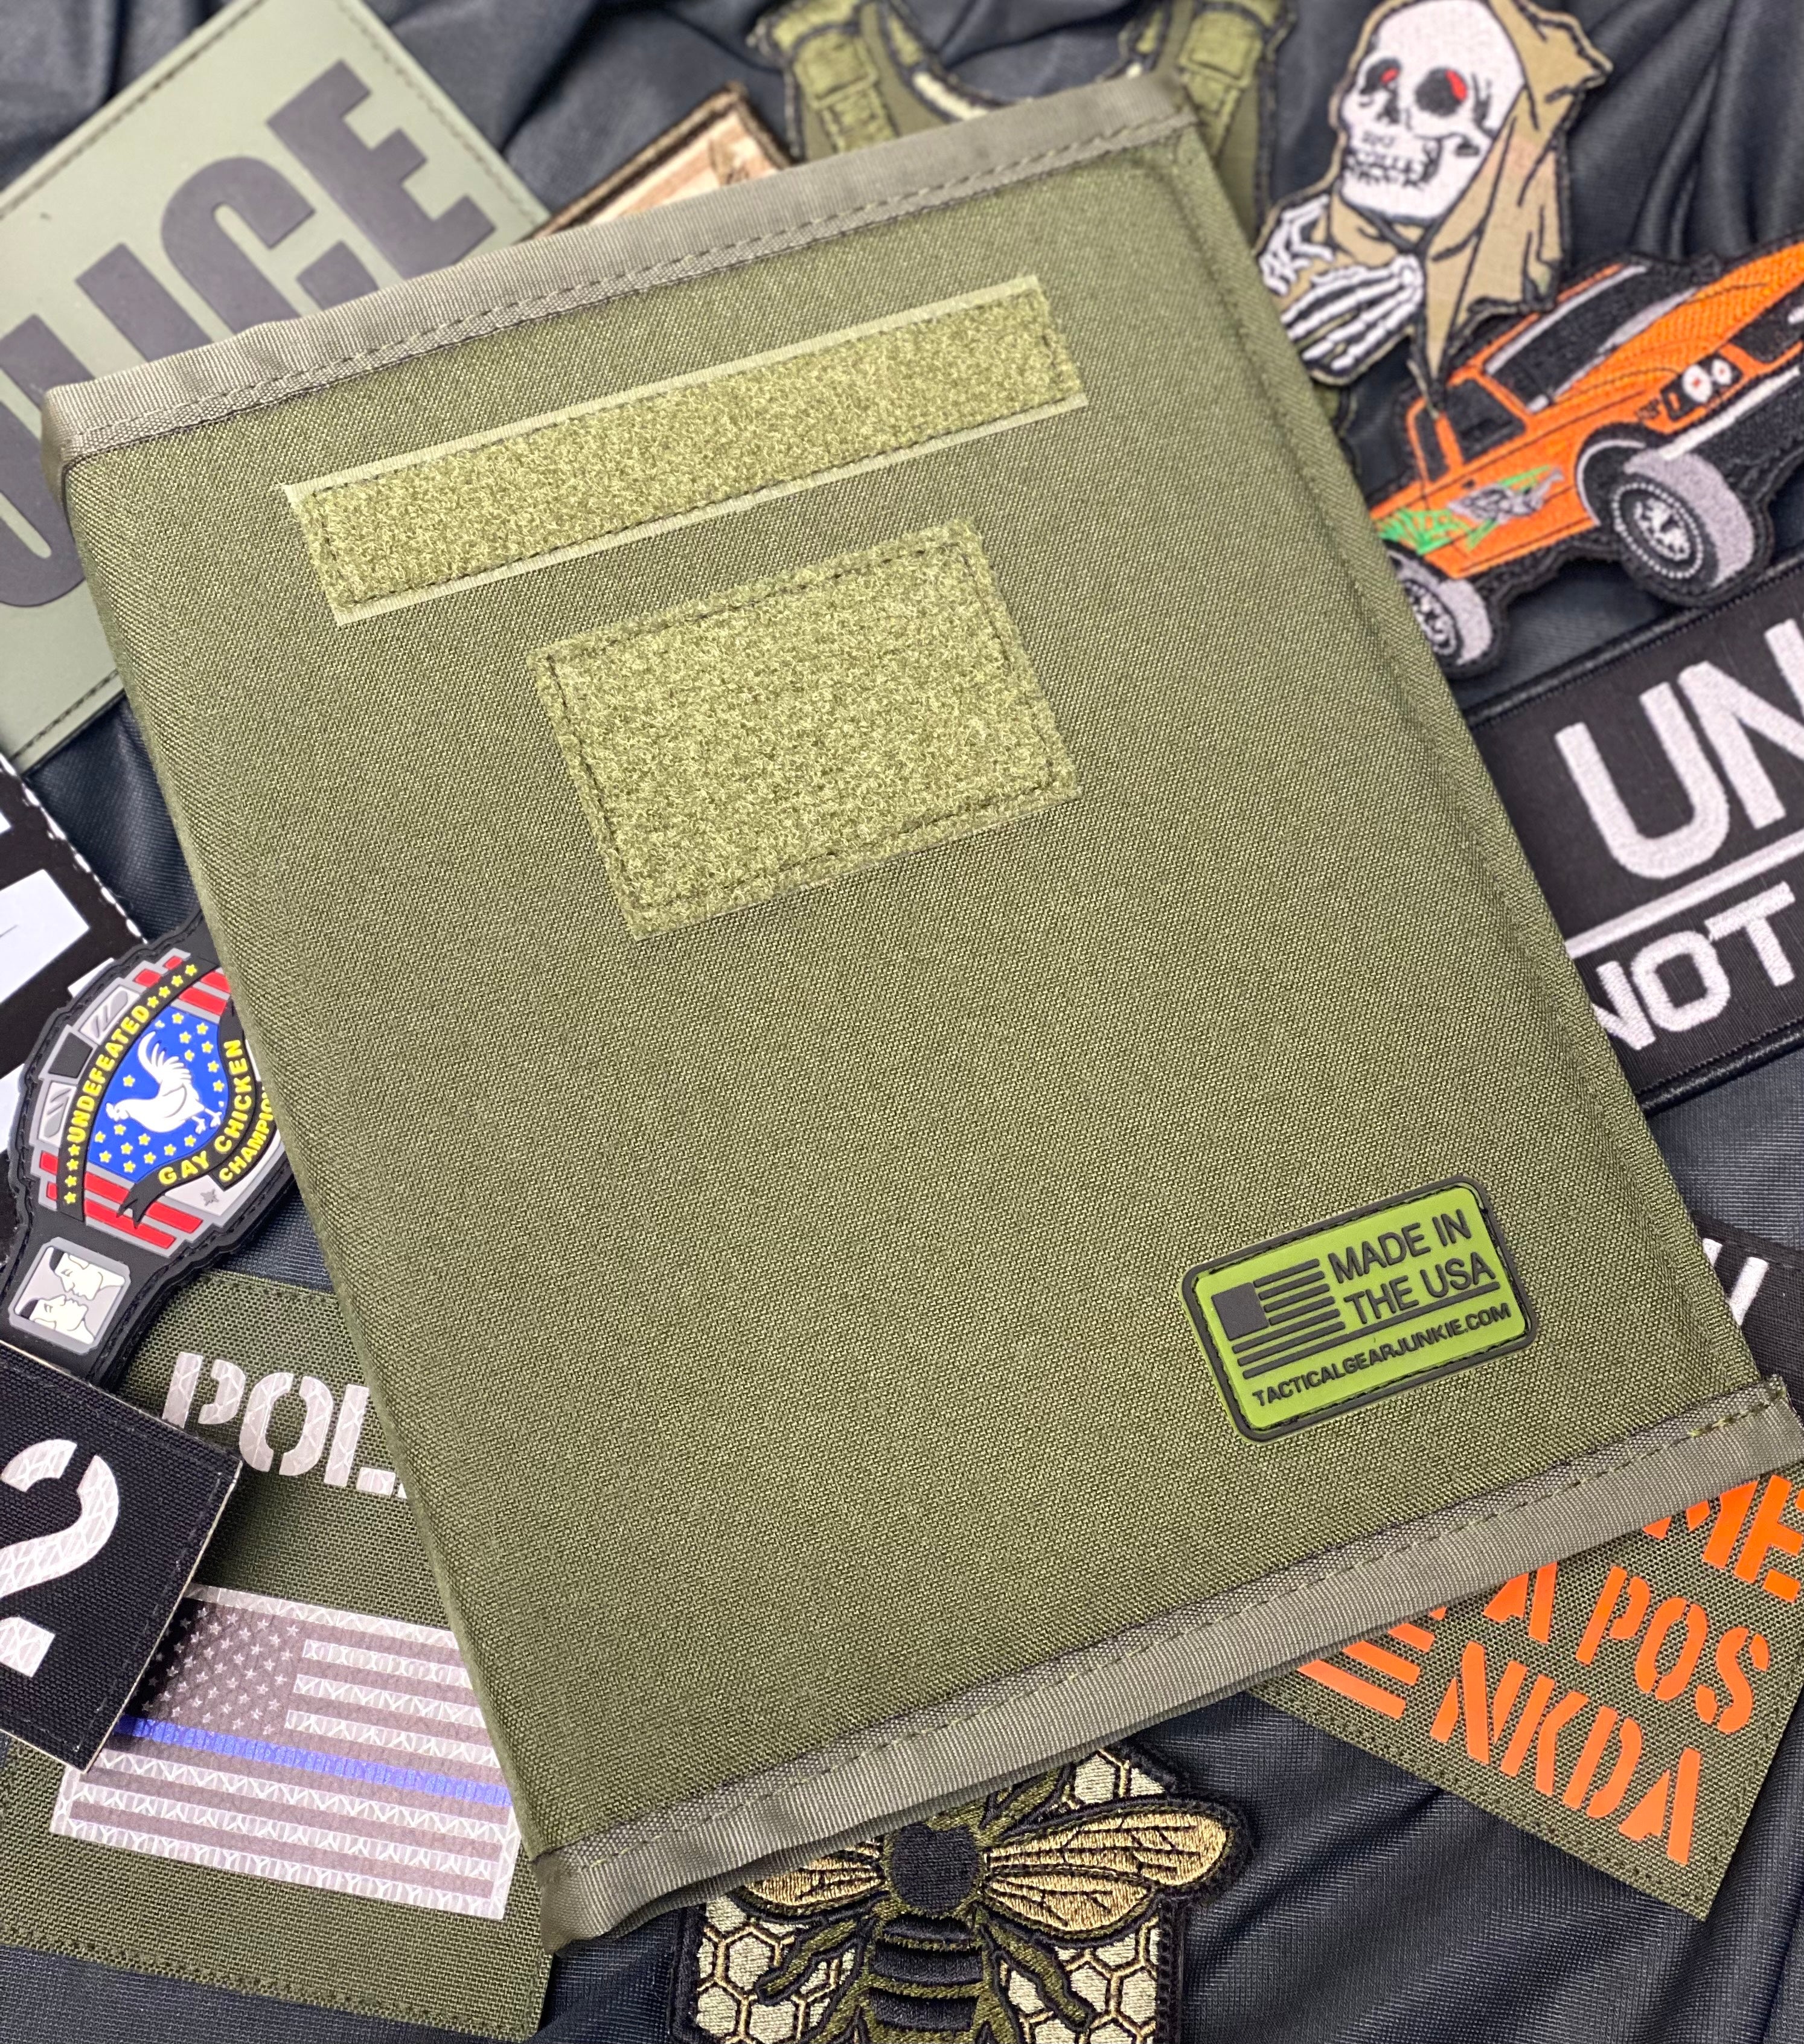 V.2.0 - Tactical Patch Book - American Made